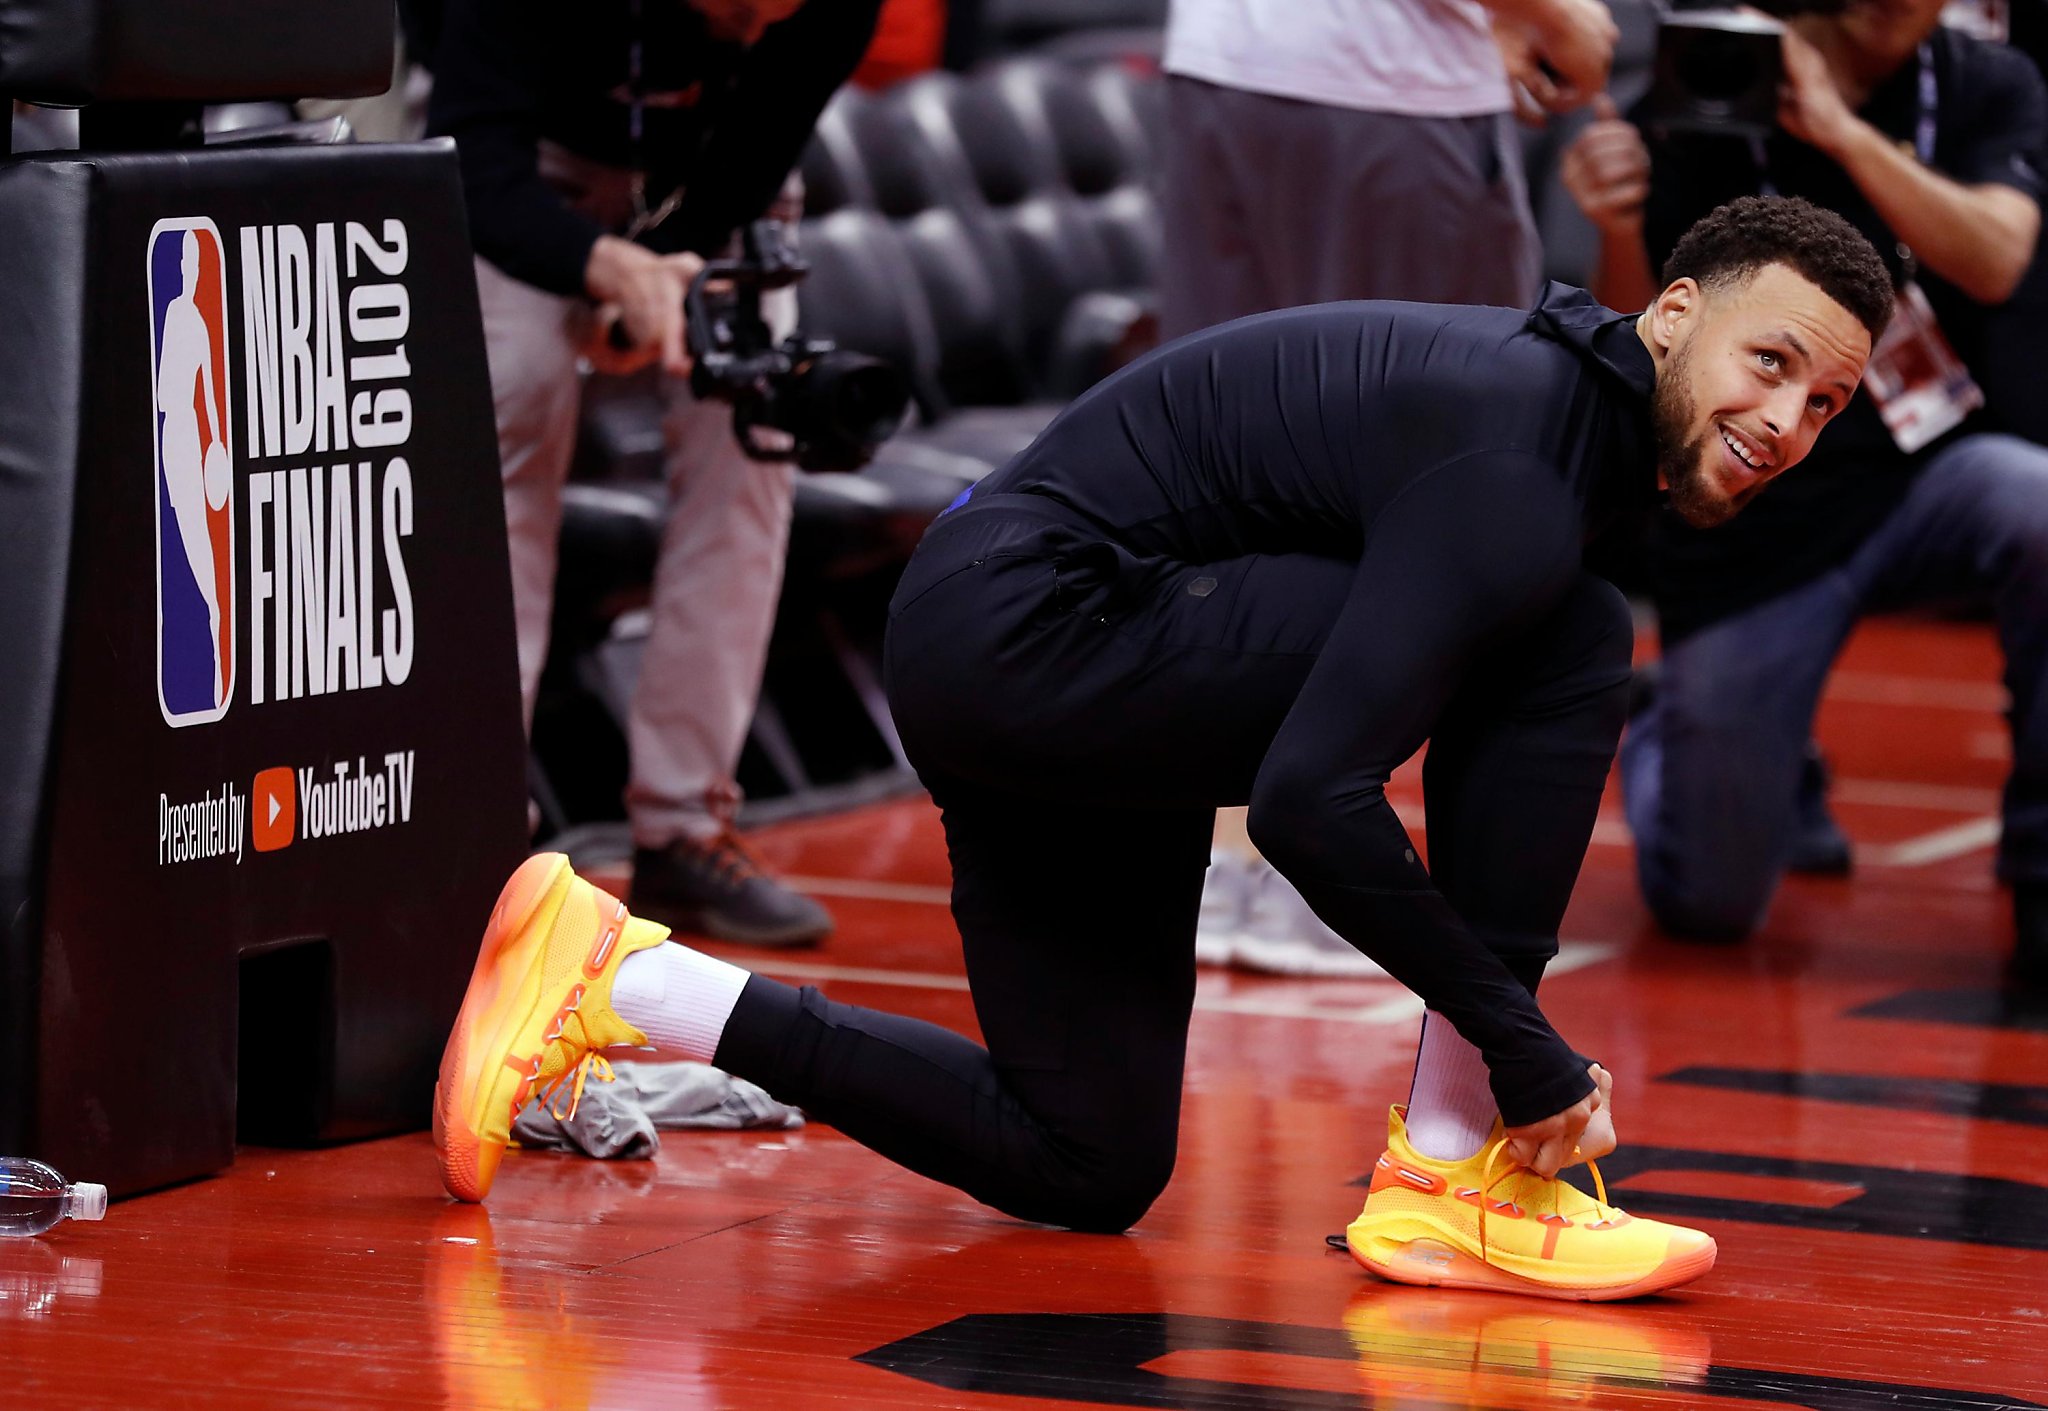 At the NBA Finals, an unusual change of footwear